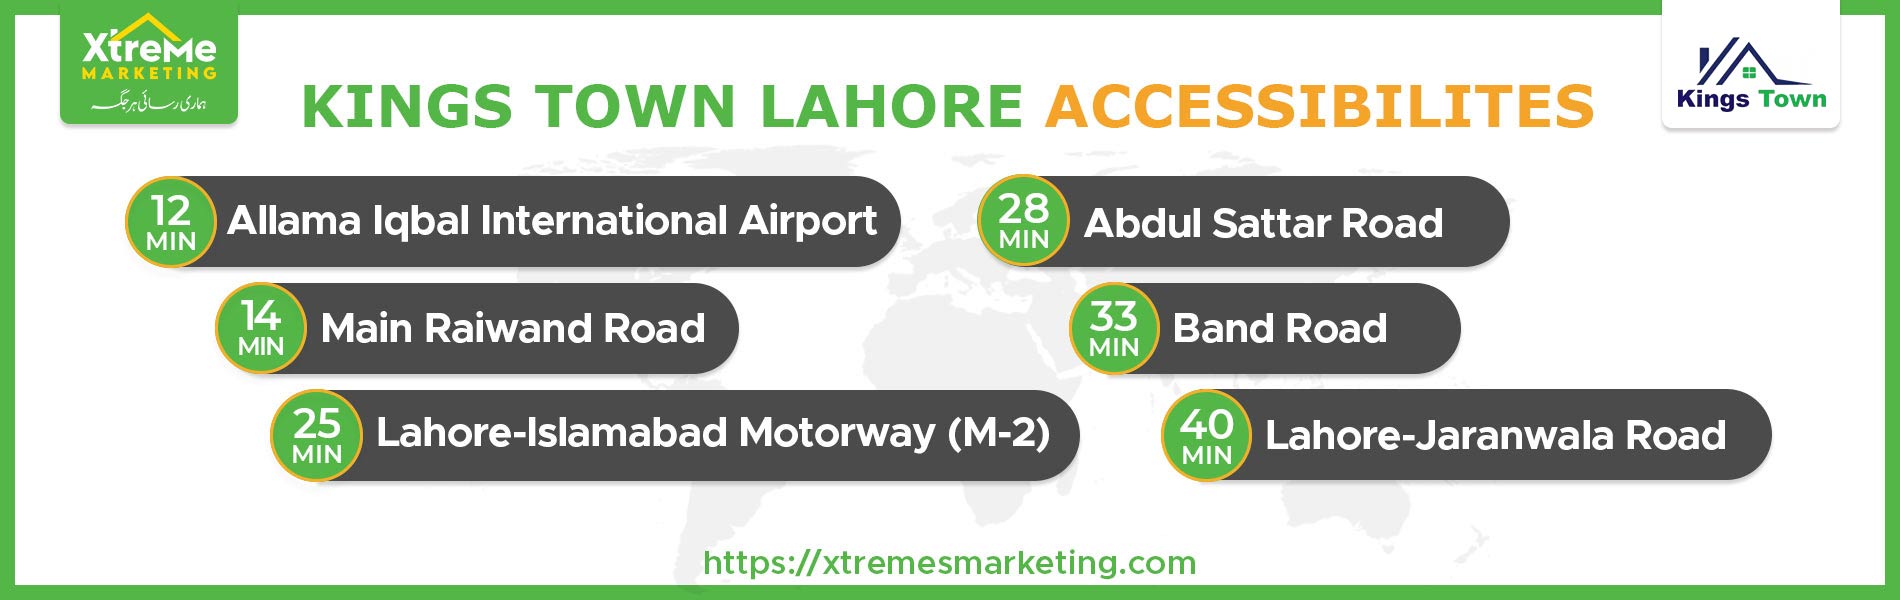 Kings Town Lahore Accessibilites